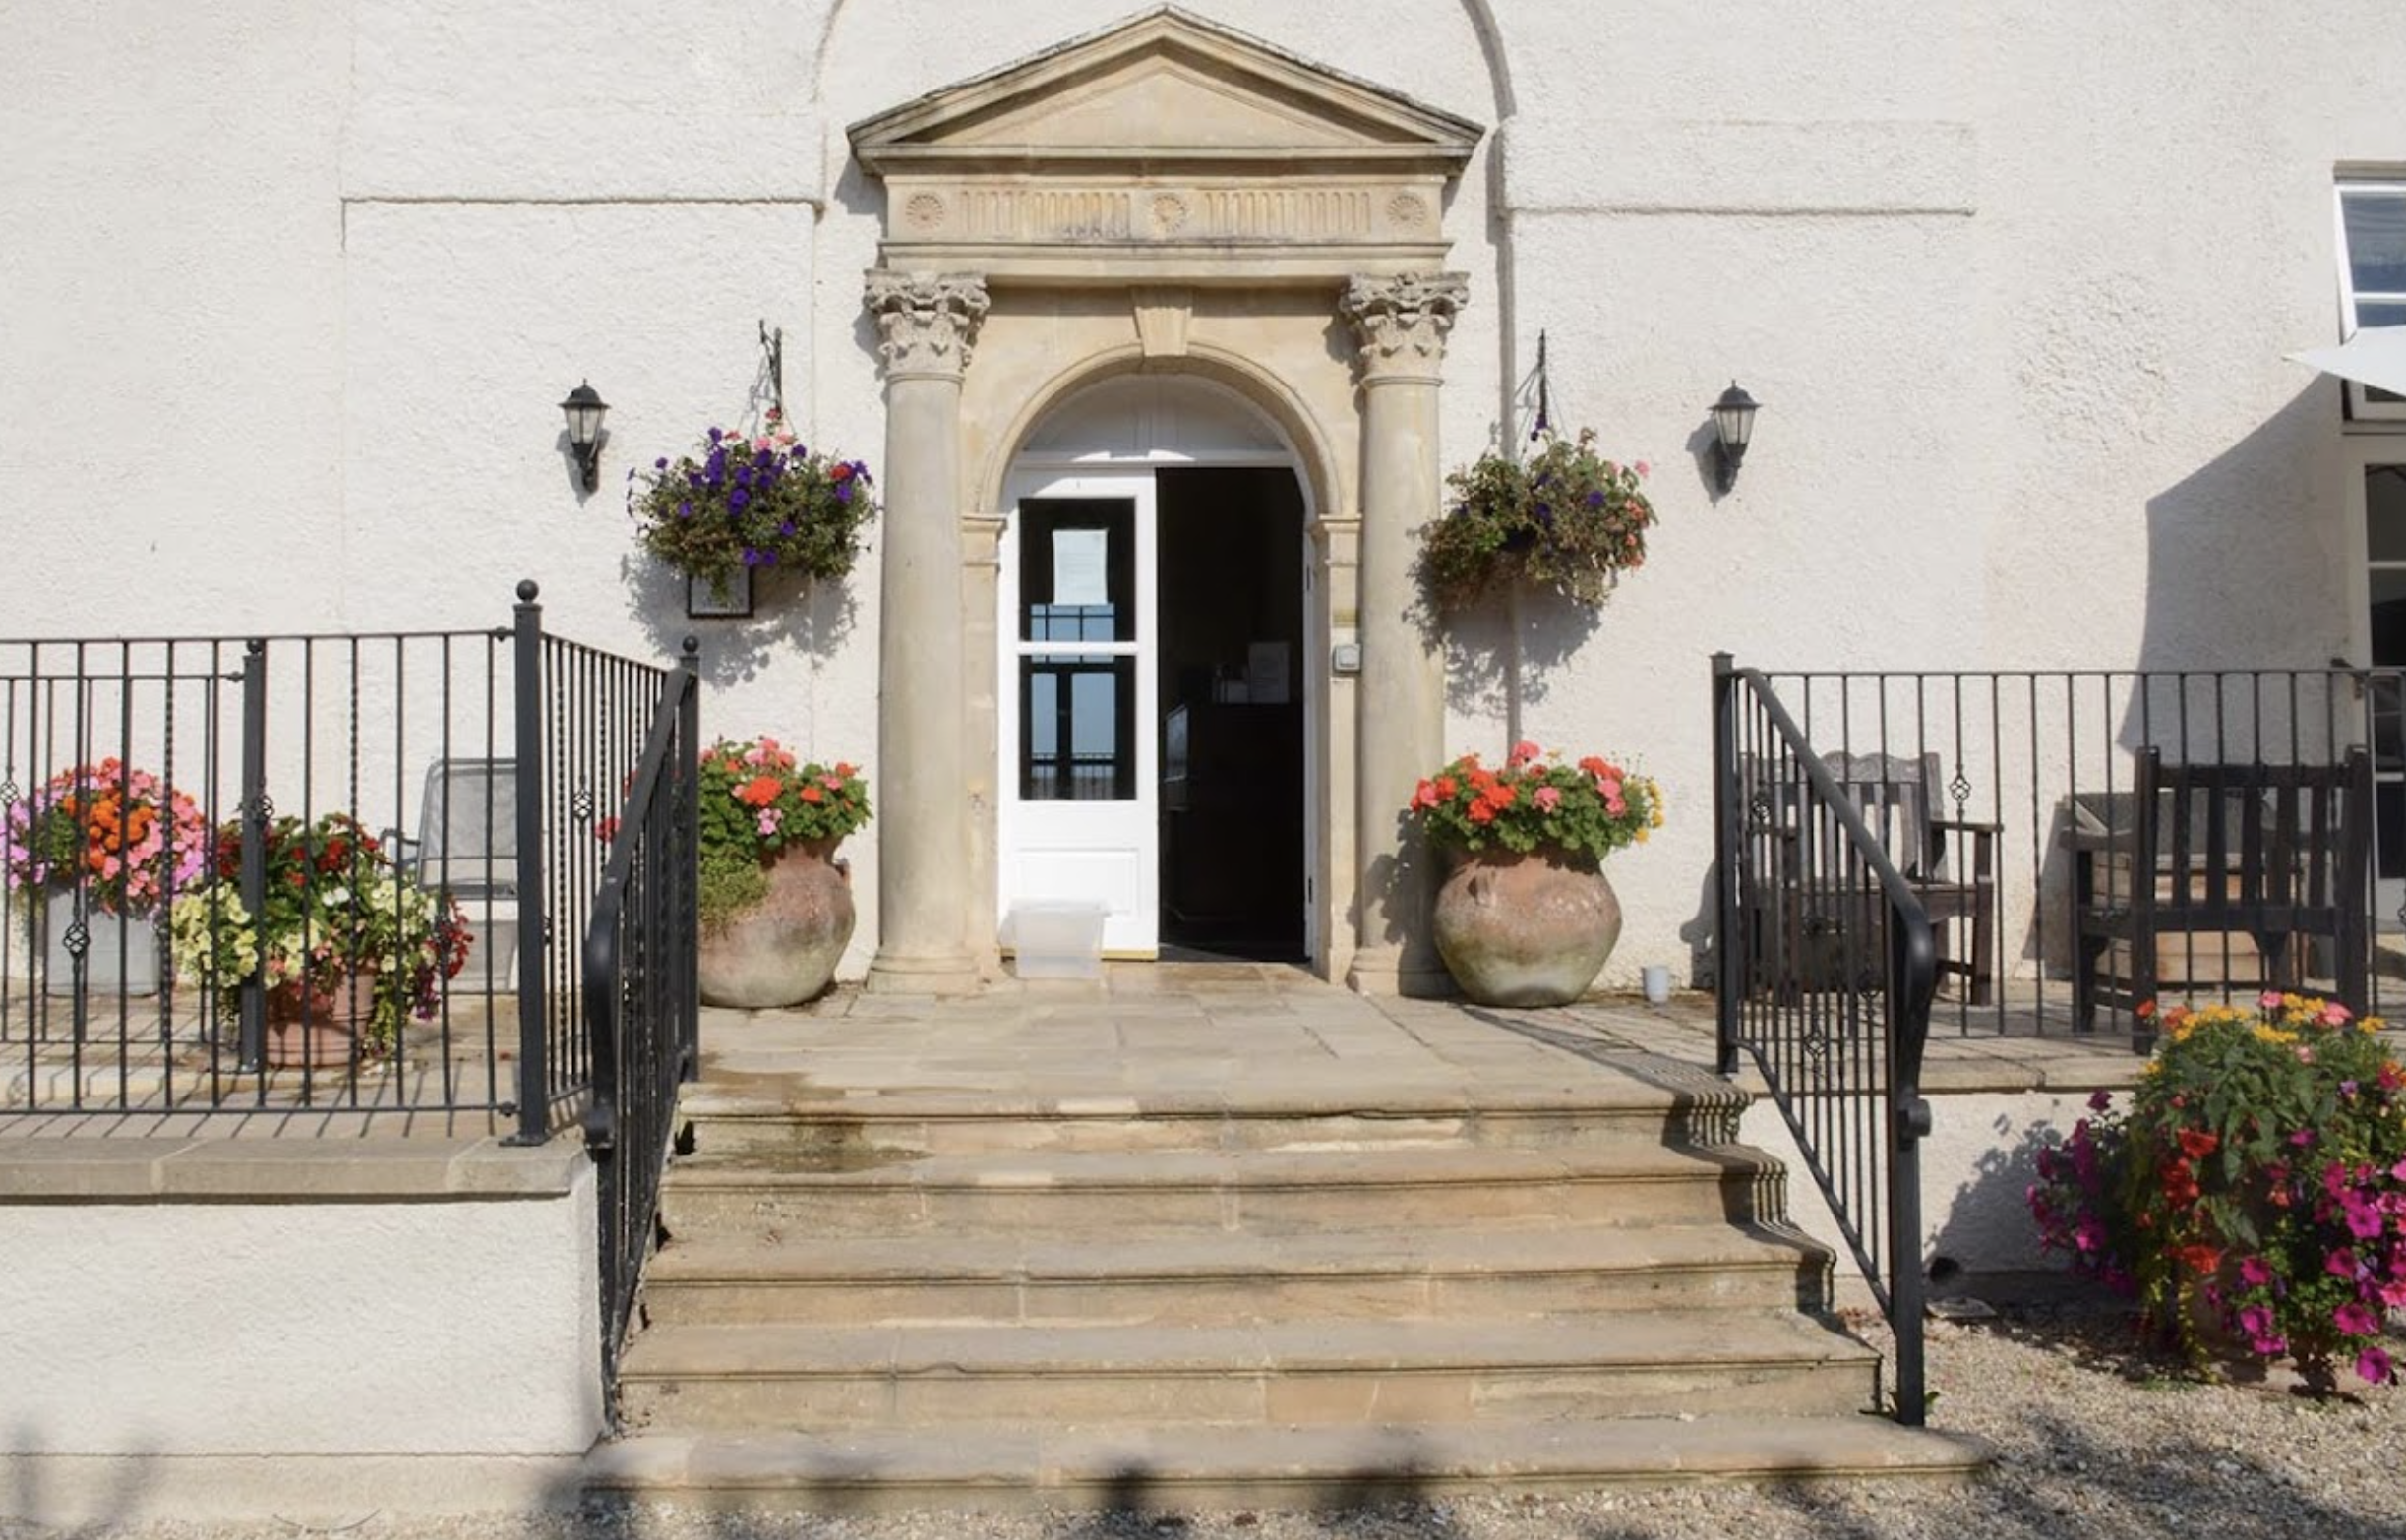 Entrance of Beauchamp House care home in Taunton, Devon